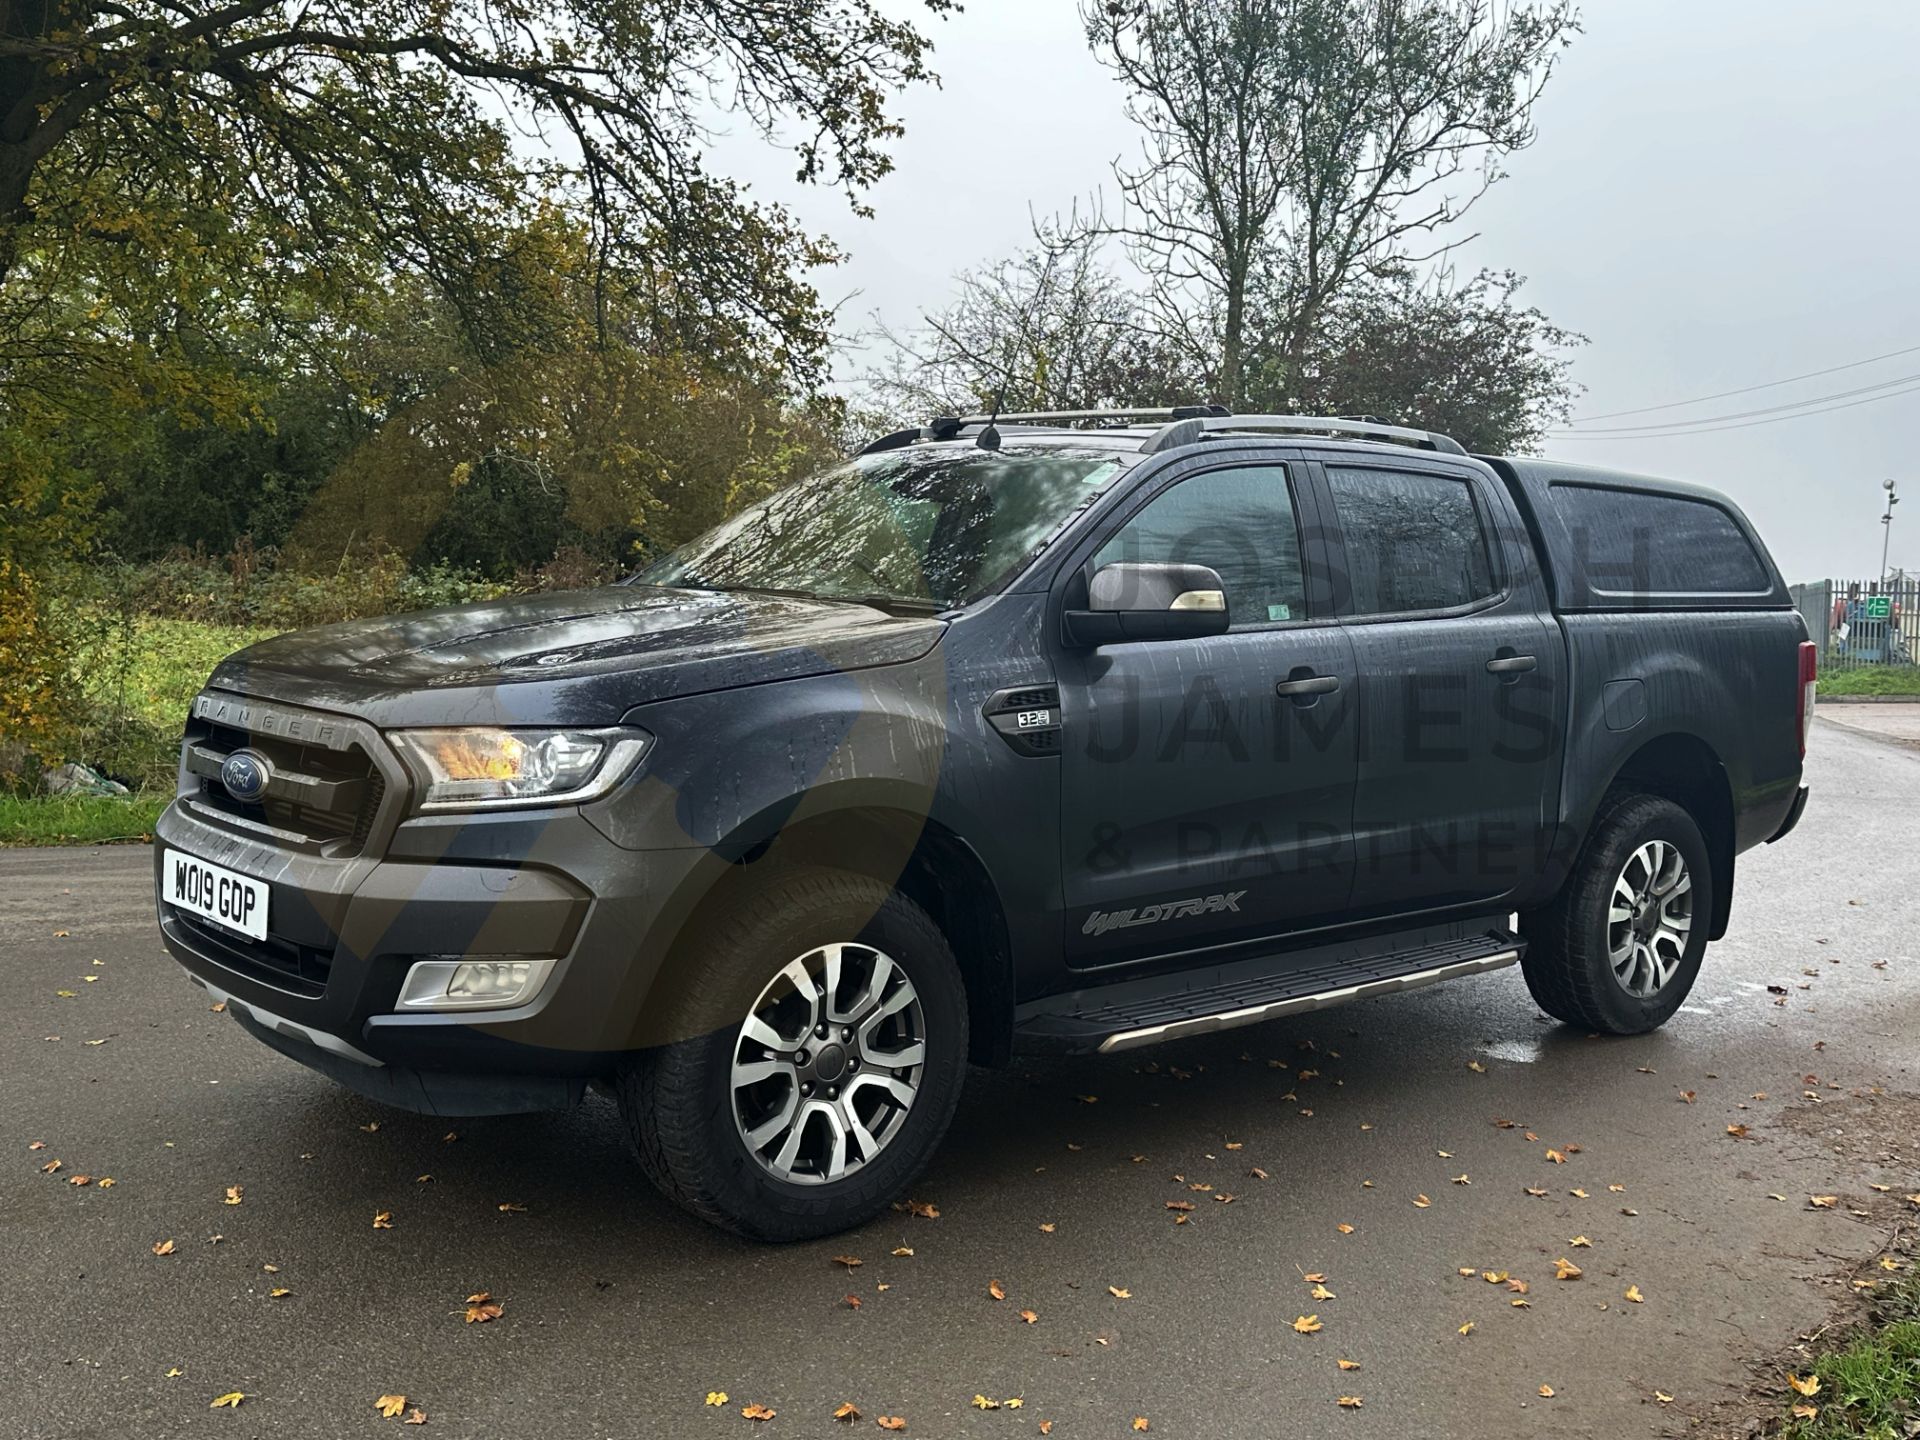 FORD RANGER *WILDTRAK EDITION* DOUBLE CAB PICK-UP (2019 - EURO 6) 3.2 TDCI - AUTOMATIC (1 OWNER) - Image 7 of 52